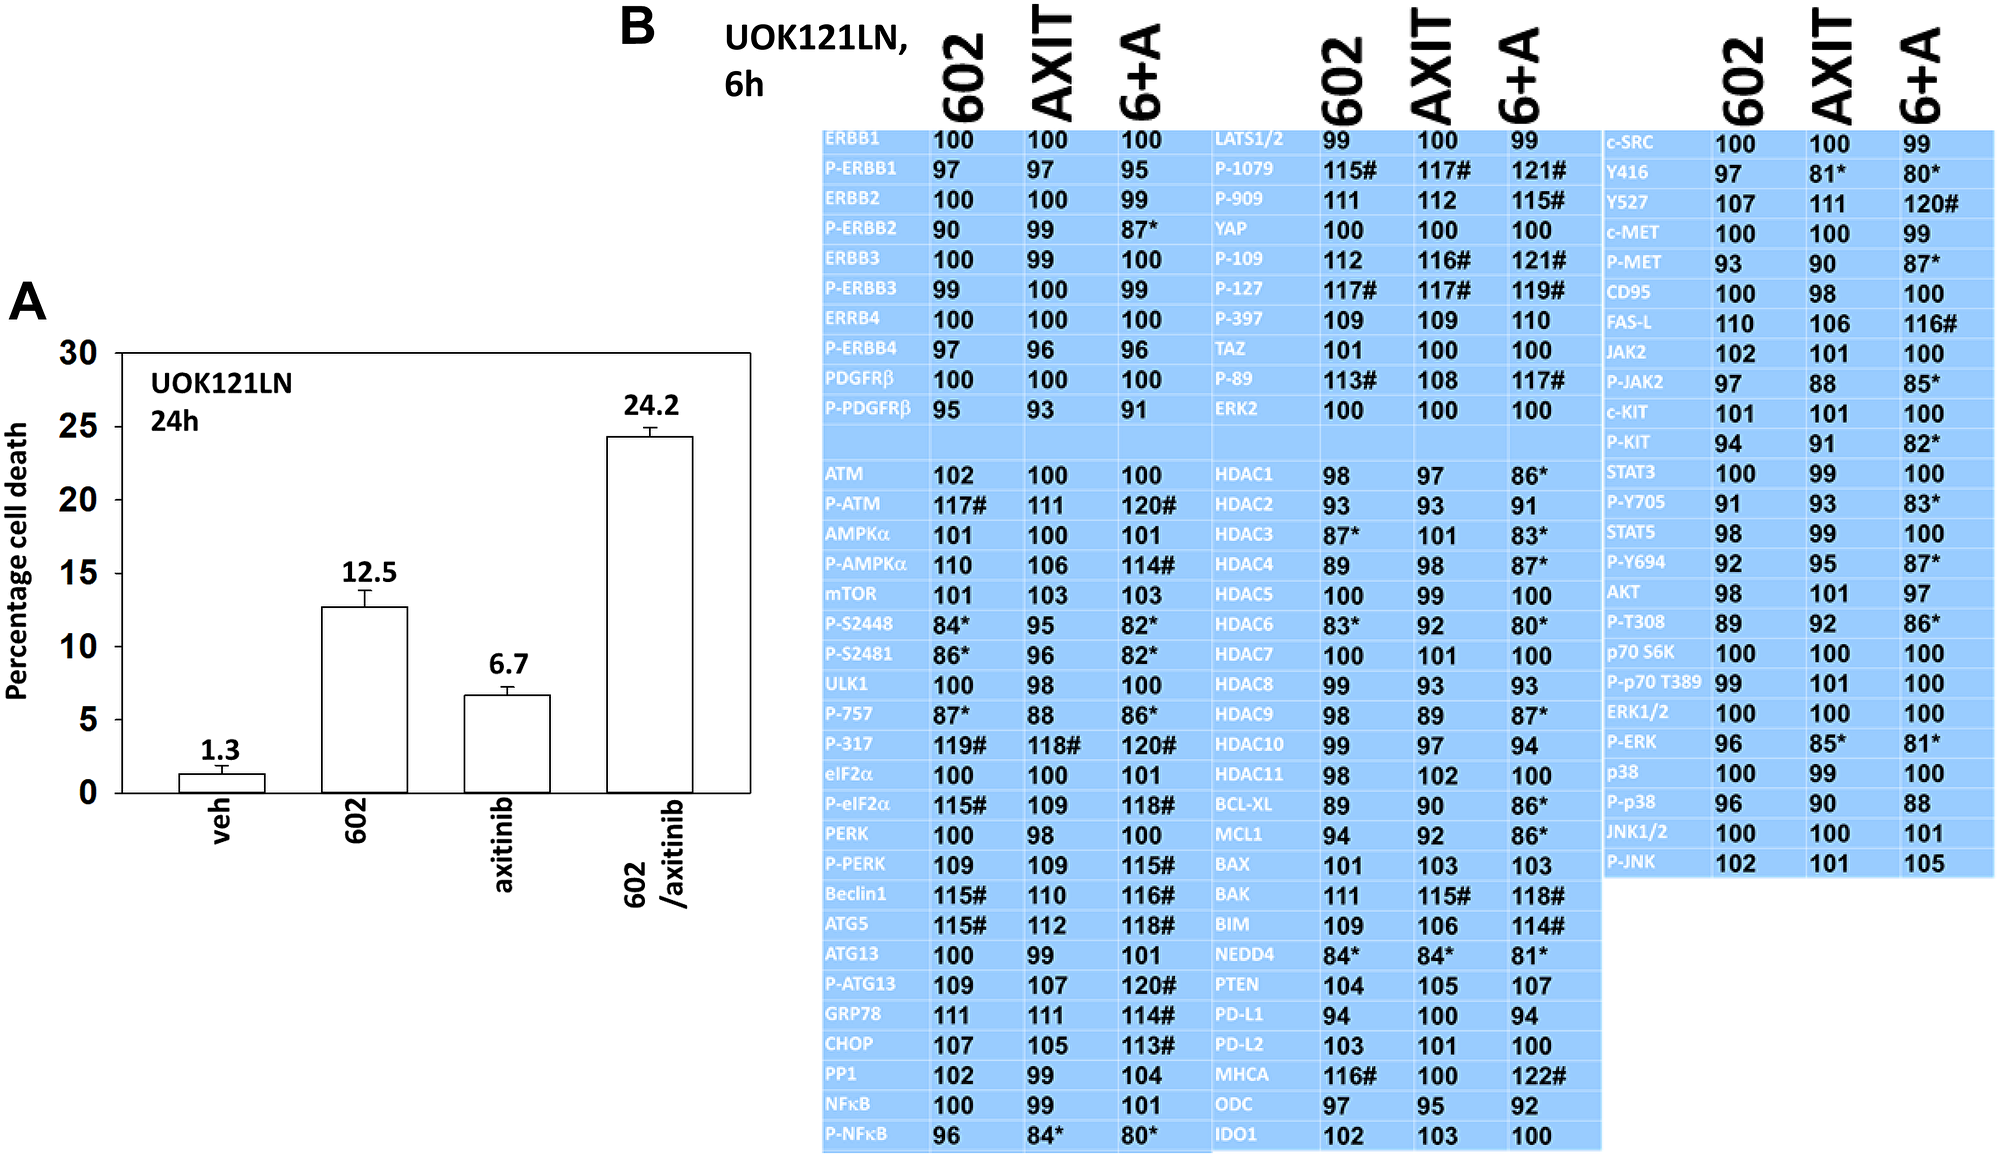 GZ17-6.02 and axitinib regulate protein expression and protein phosphorylation in UOK121LN RCCs.